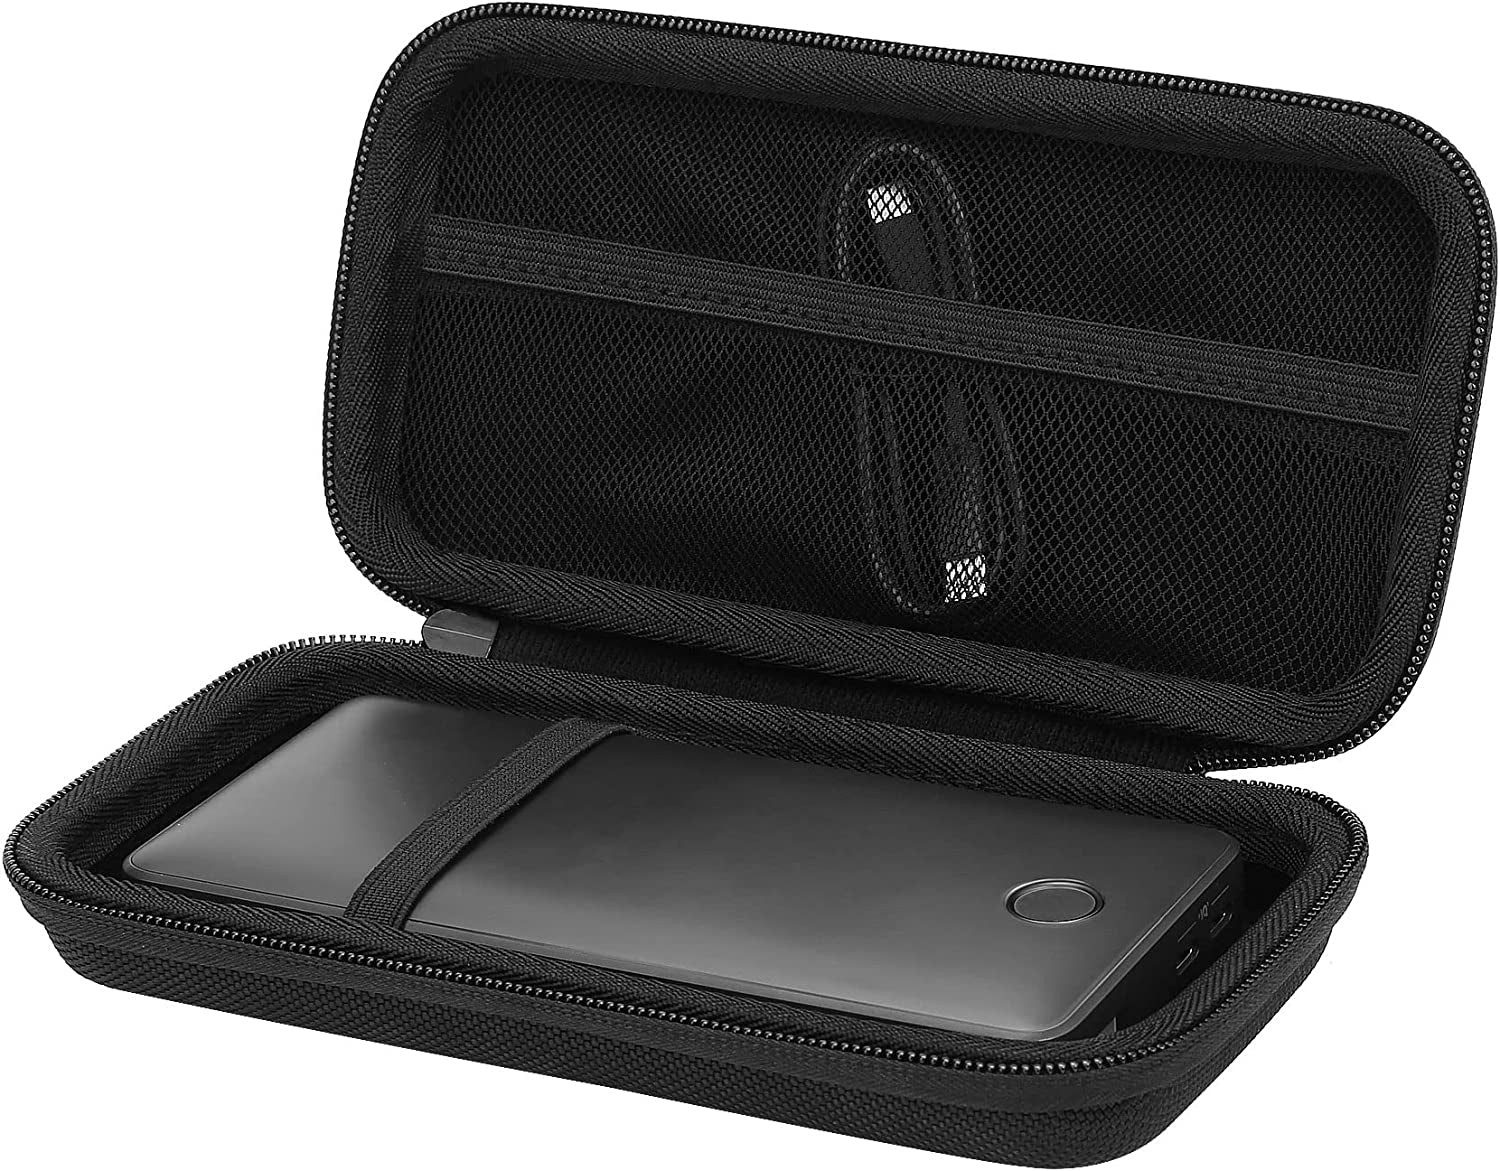  Hermitshell Hard Travel Case for Anker PowerCore 20000 20000mAh  Power Pack Portable Charger-Not Fit Anker PowerCore Essential 20000 /  Essential 20000 PD : Cell Phones & Accessories